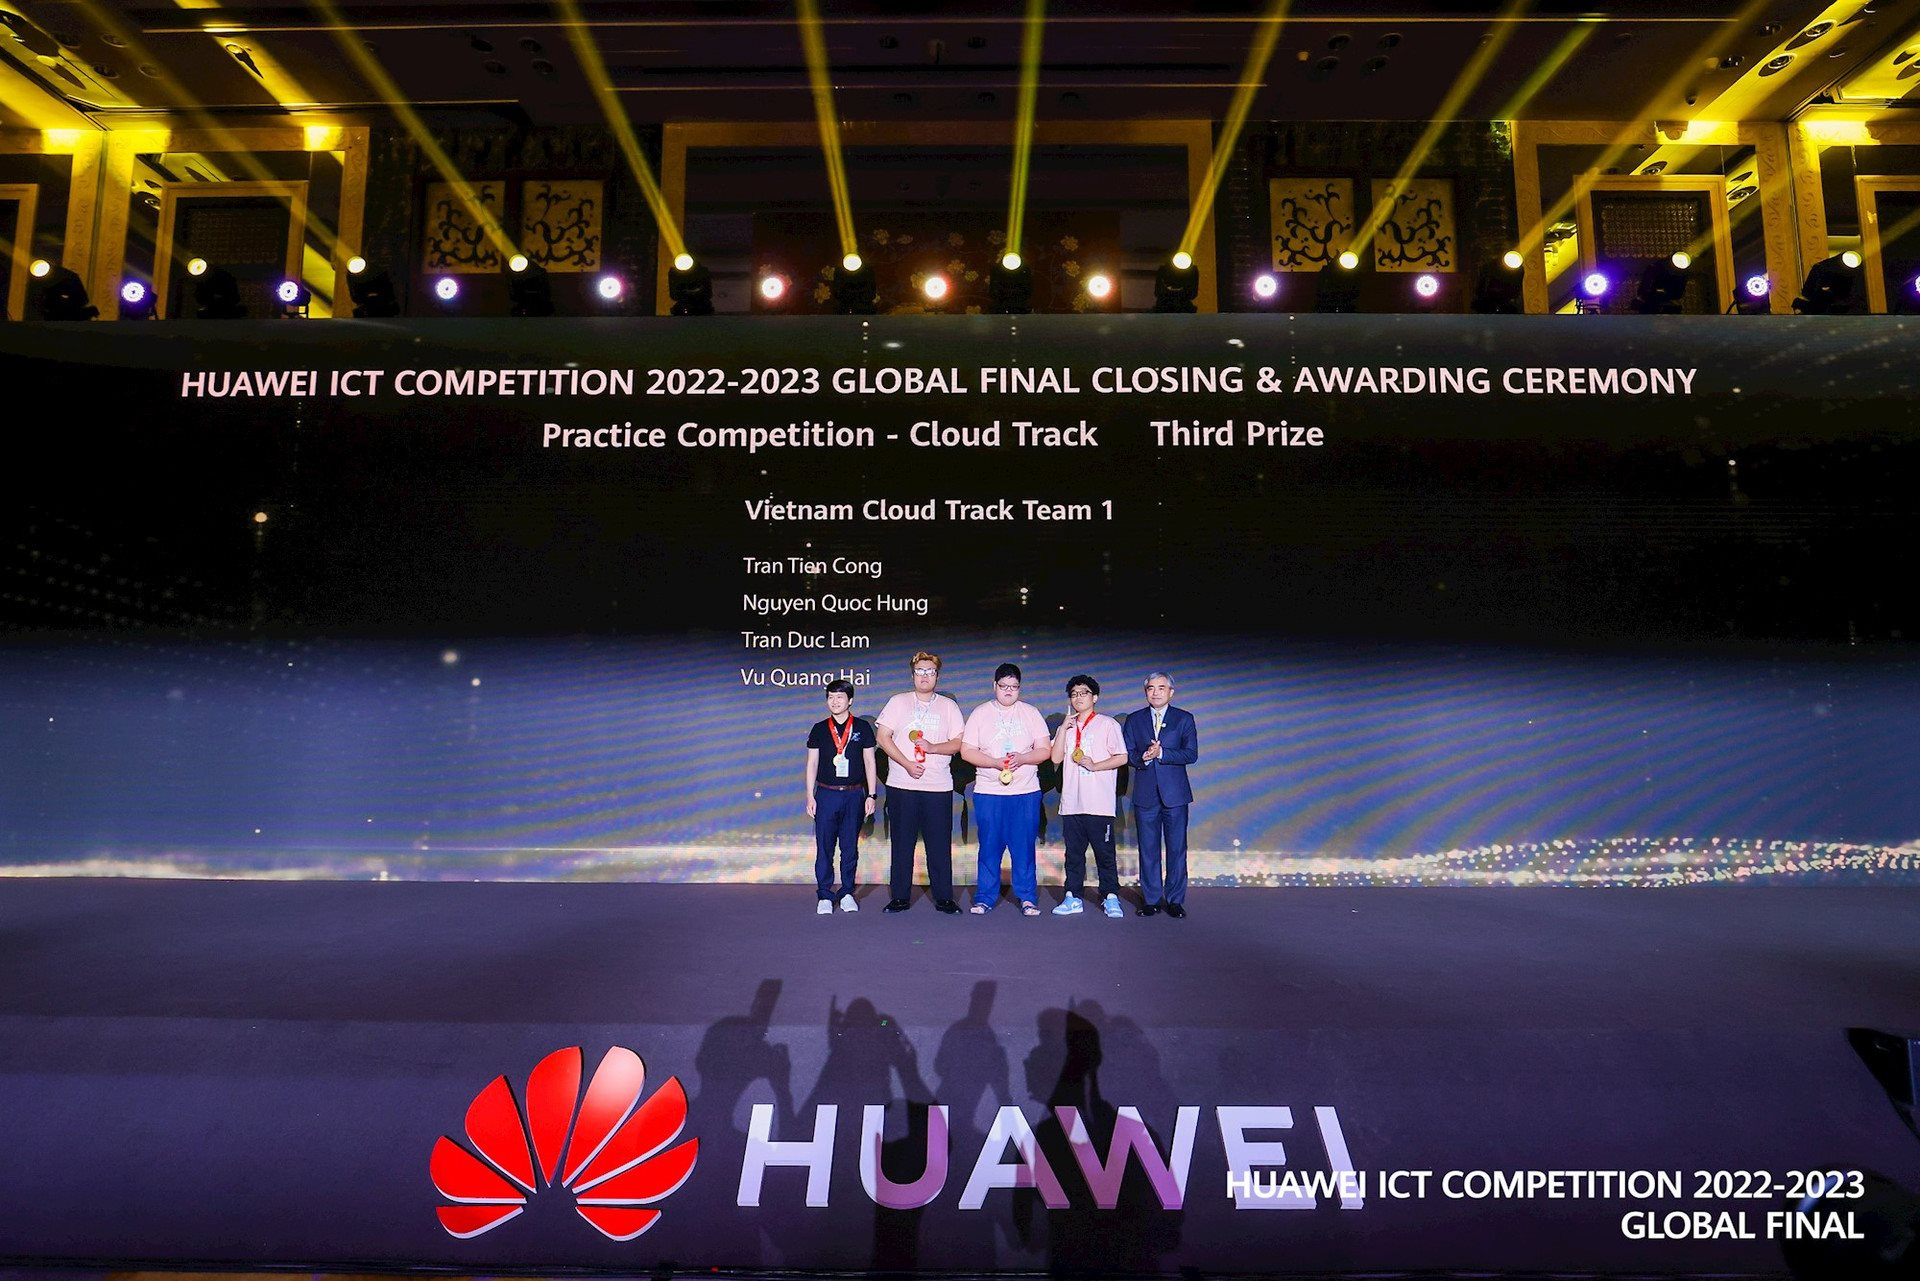 _huawei-ict-competition_22-23.jpg